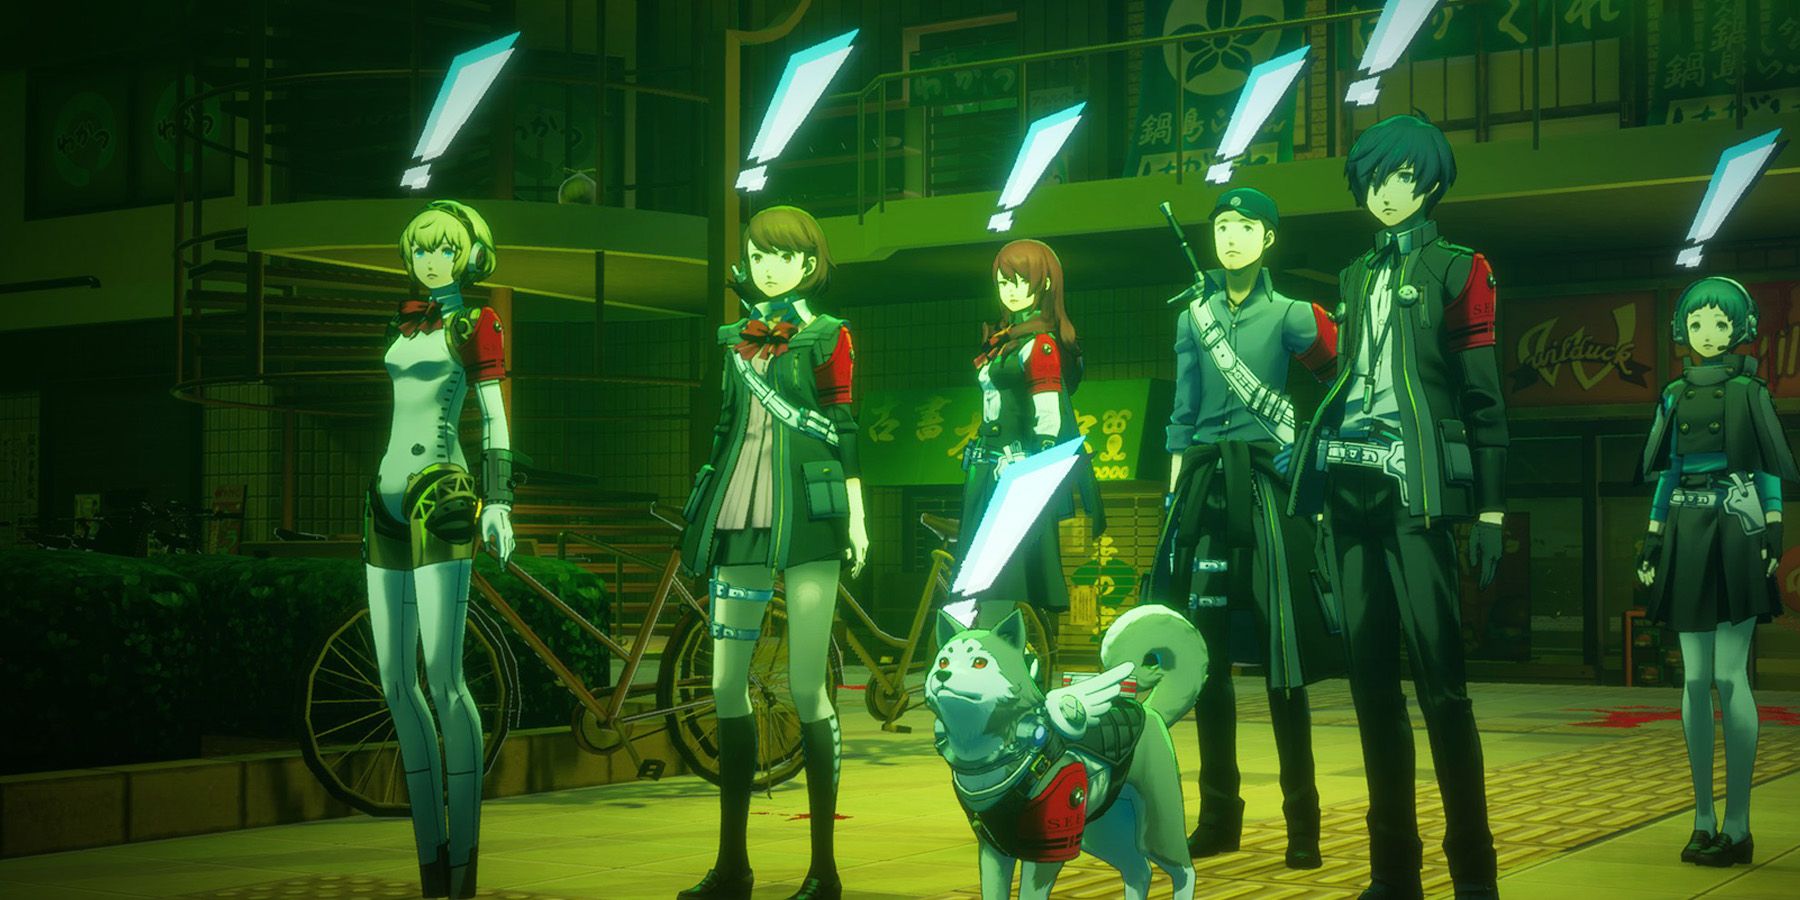 Persona 3 Reload SEES members surprised during Dark Hour at Paulownia Mall blue exclamation marks